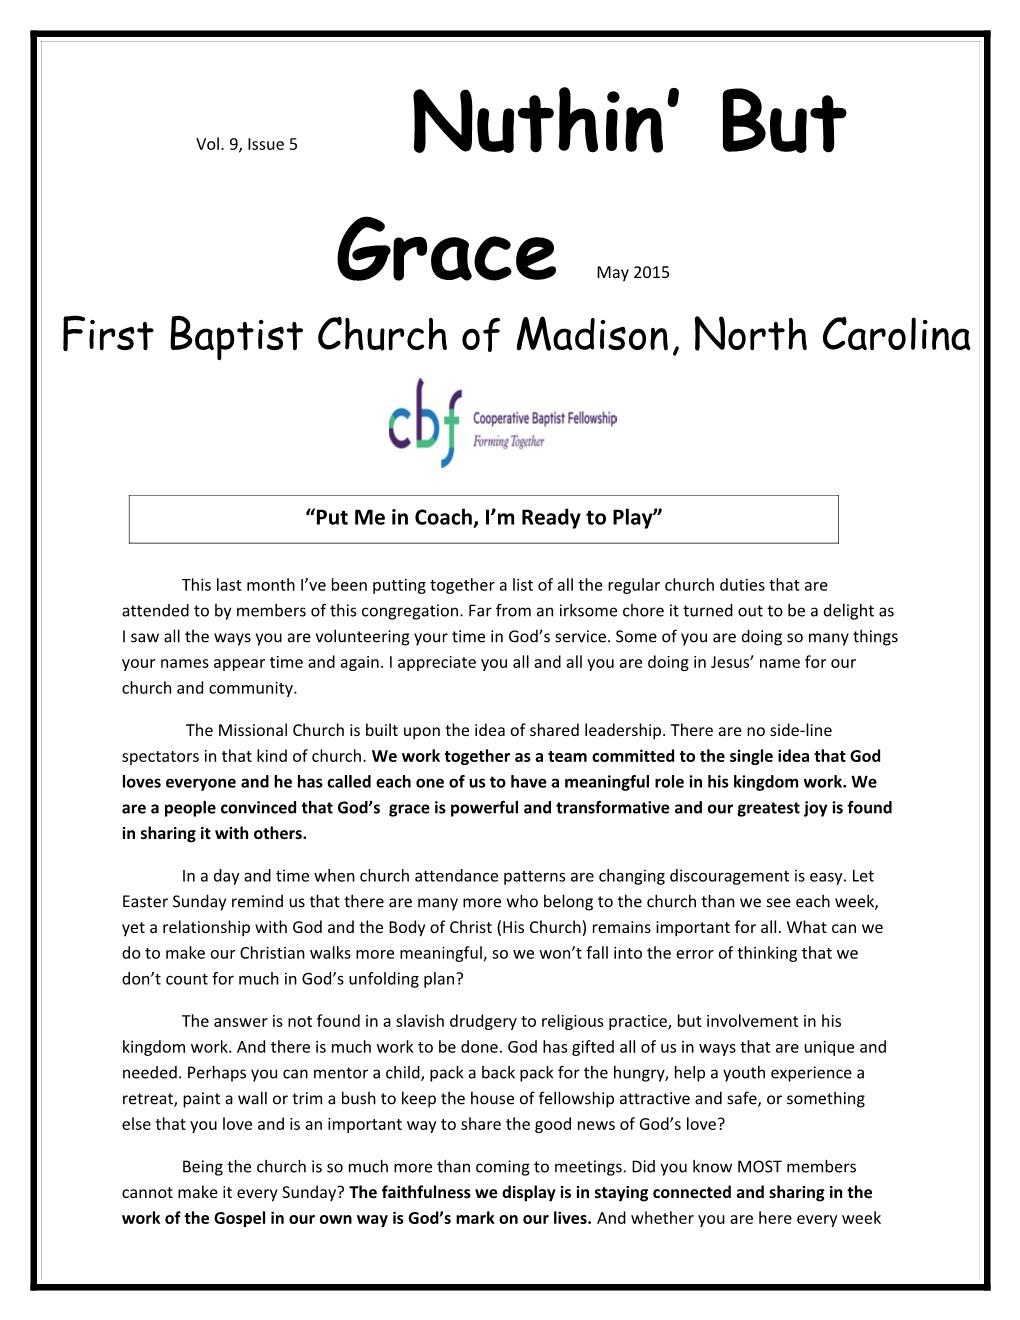 Vol.9, Issue 5 Nuthin but Grace May2015